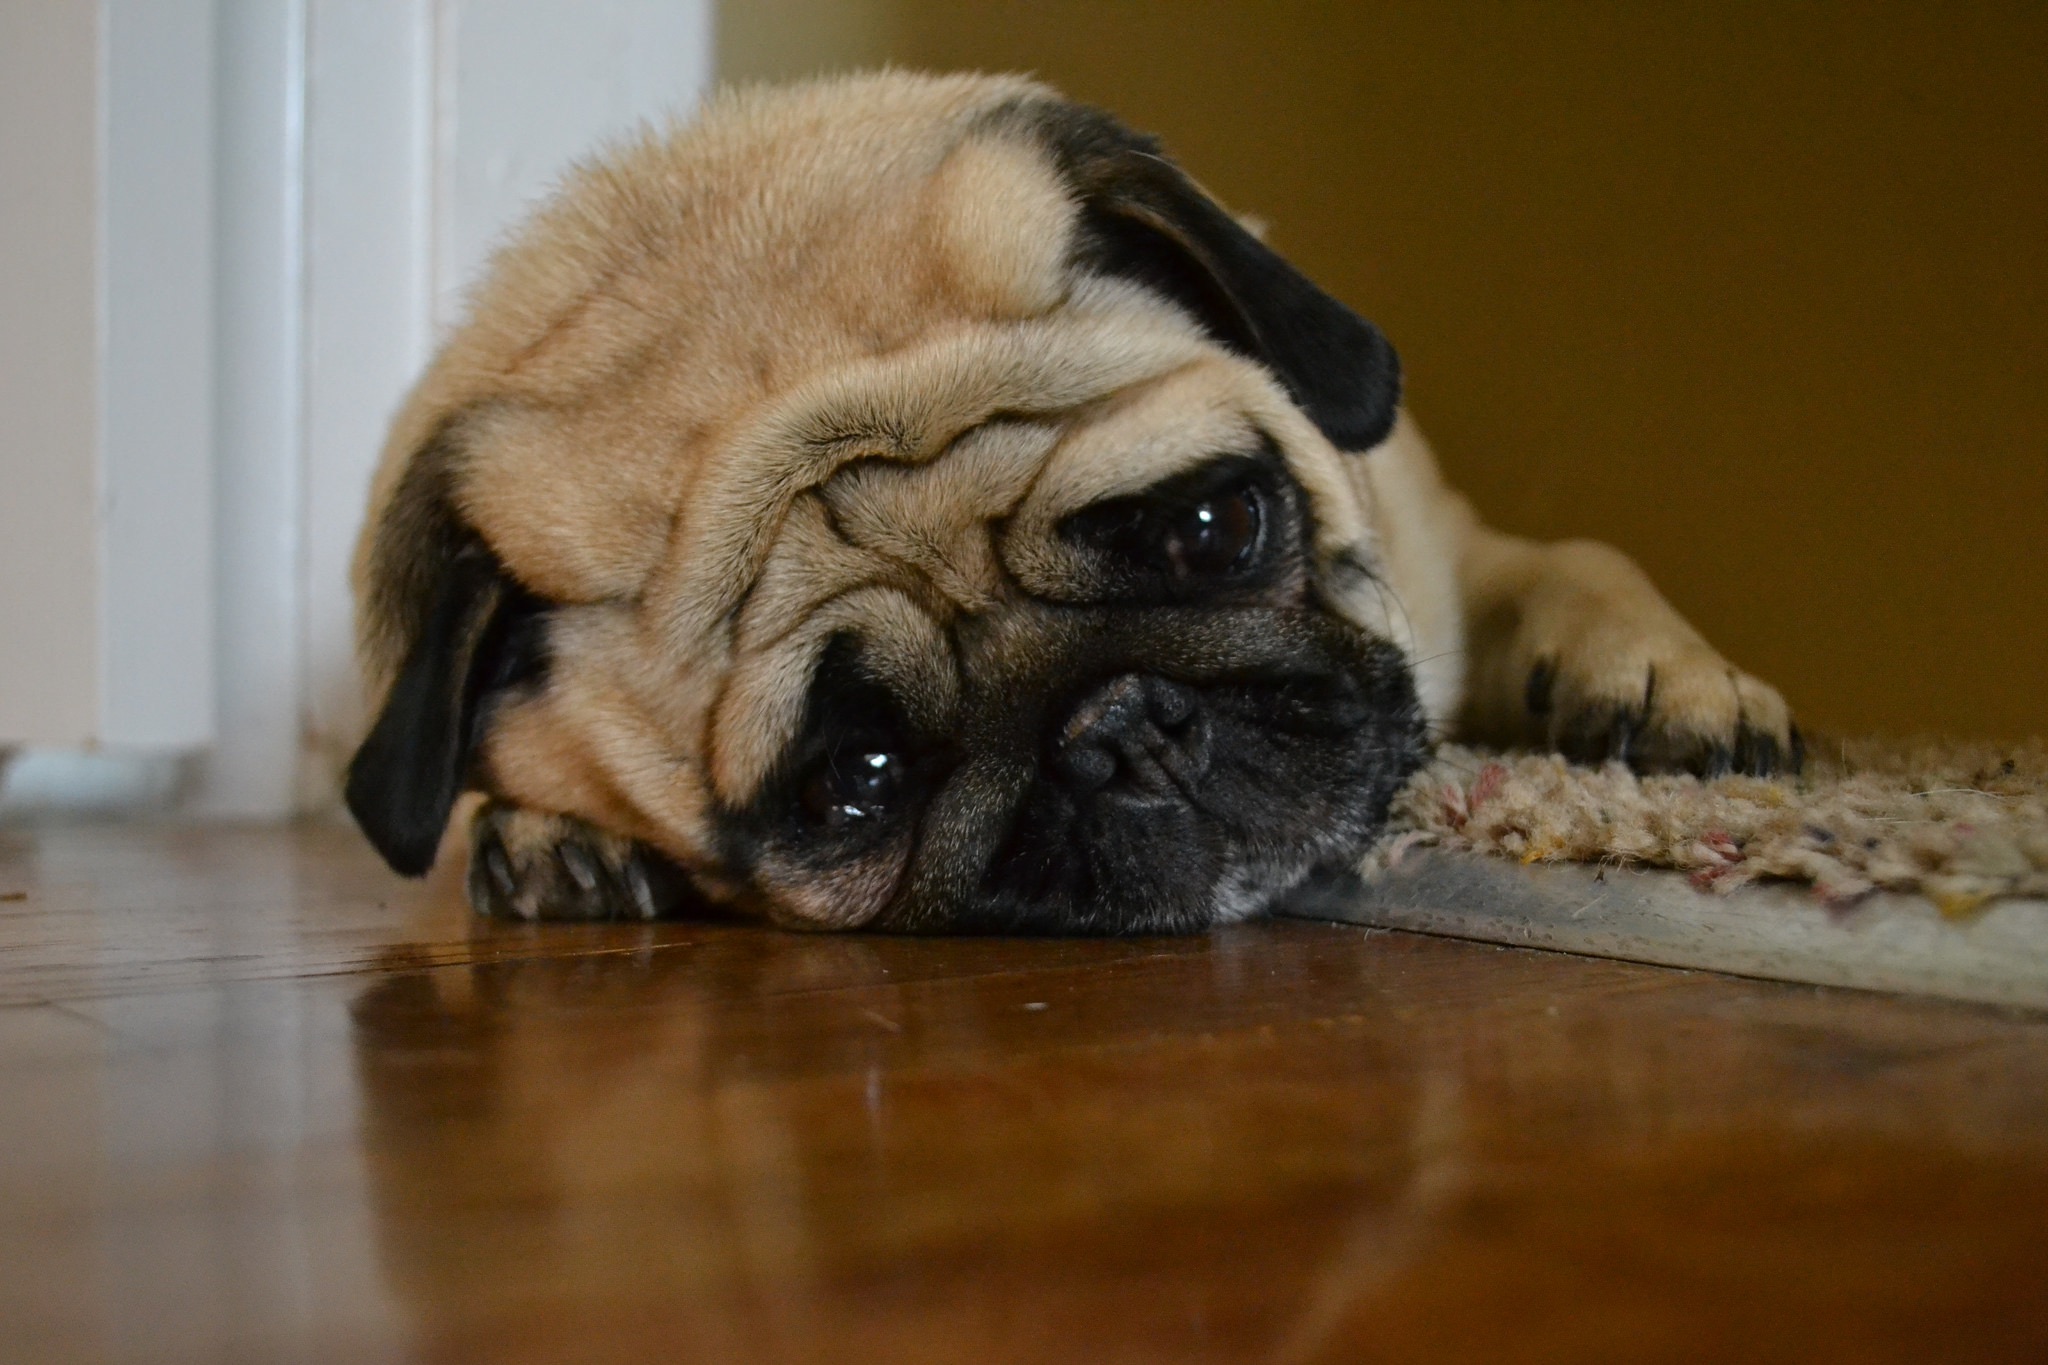 A pug, looking more or less the way Hongkongers apparently feel, according to the new World Happiness Report. Photo via Flickr/Hannah K.